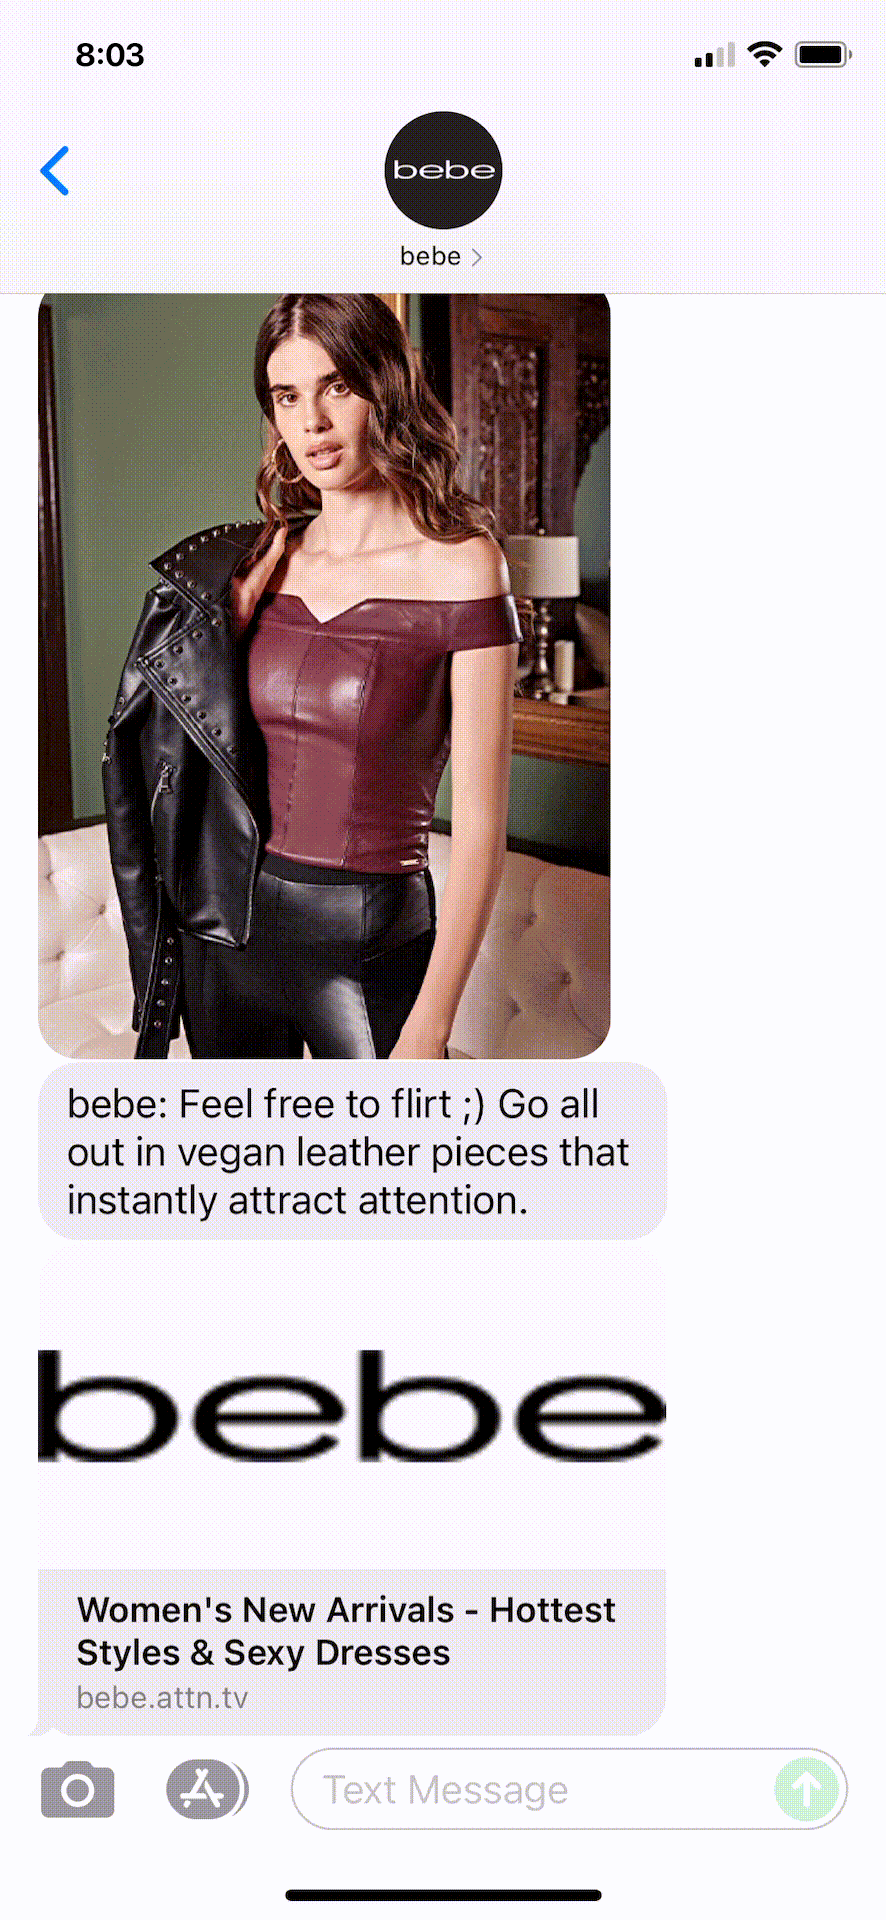 bebe-Text-Message-Marketing-Example-09.09.2021